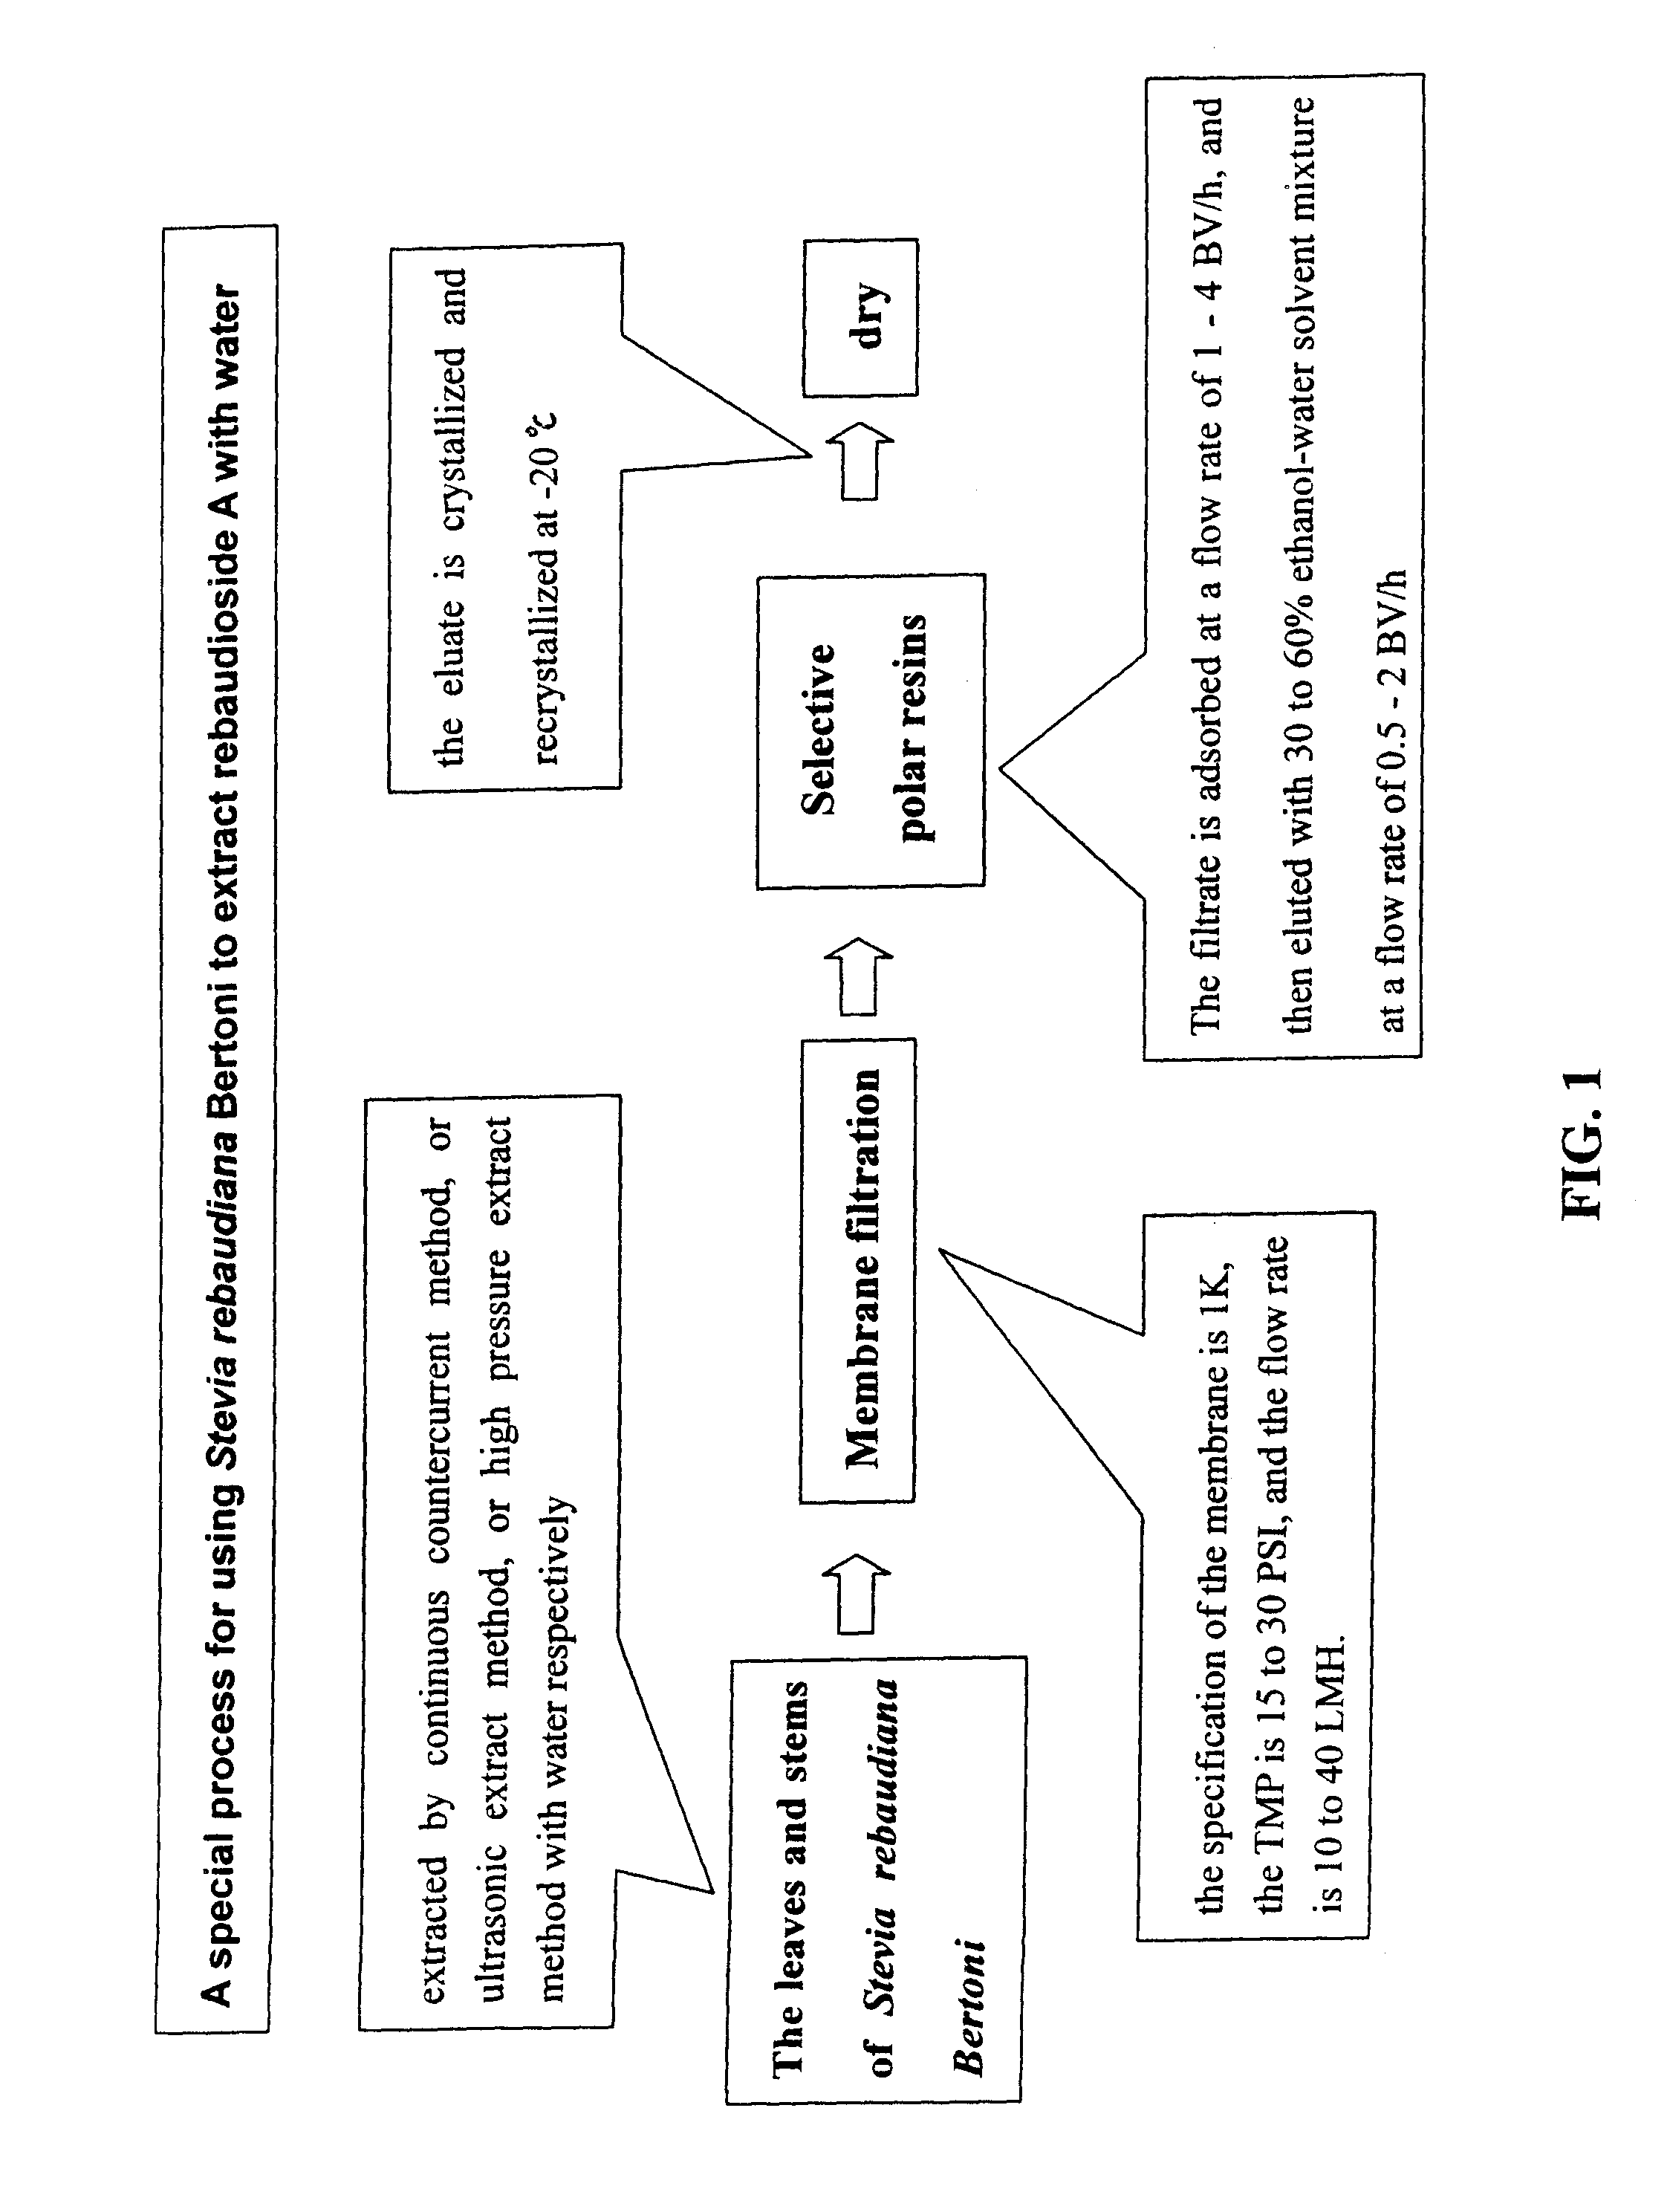 High-purity rebaudioside A and method of extracting same